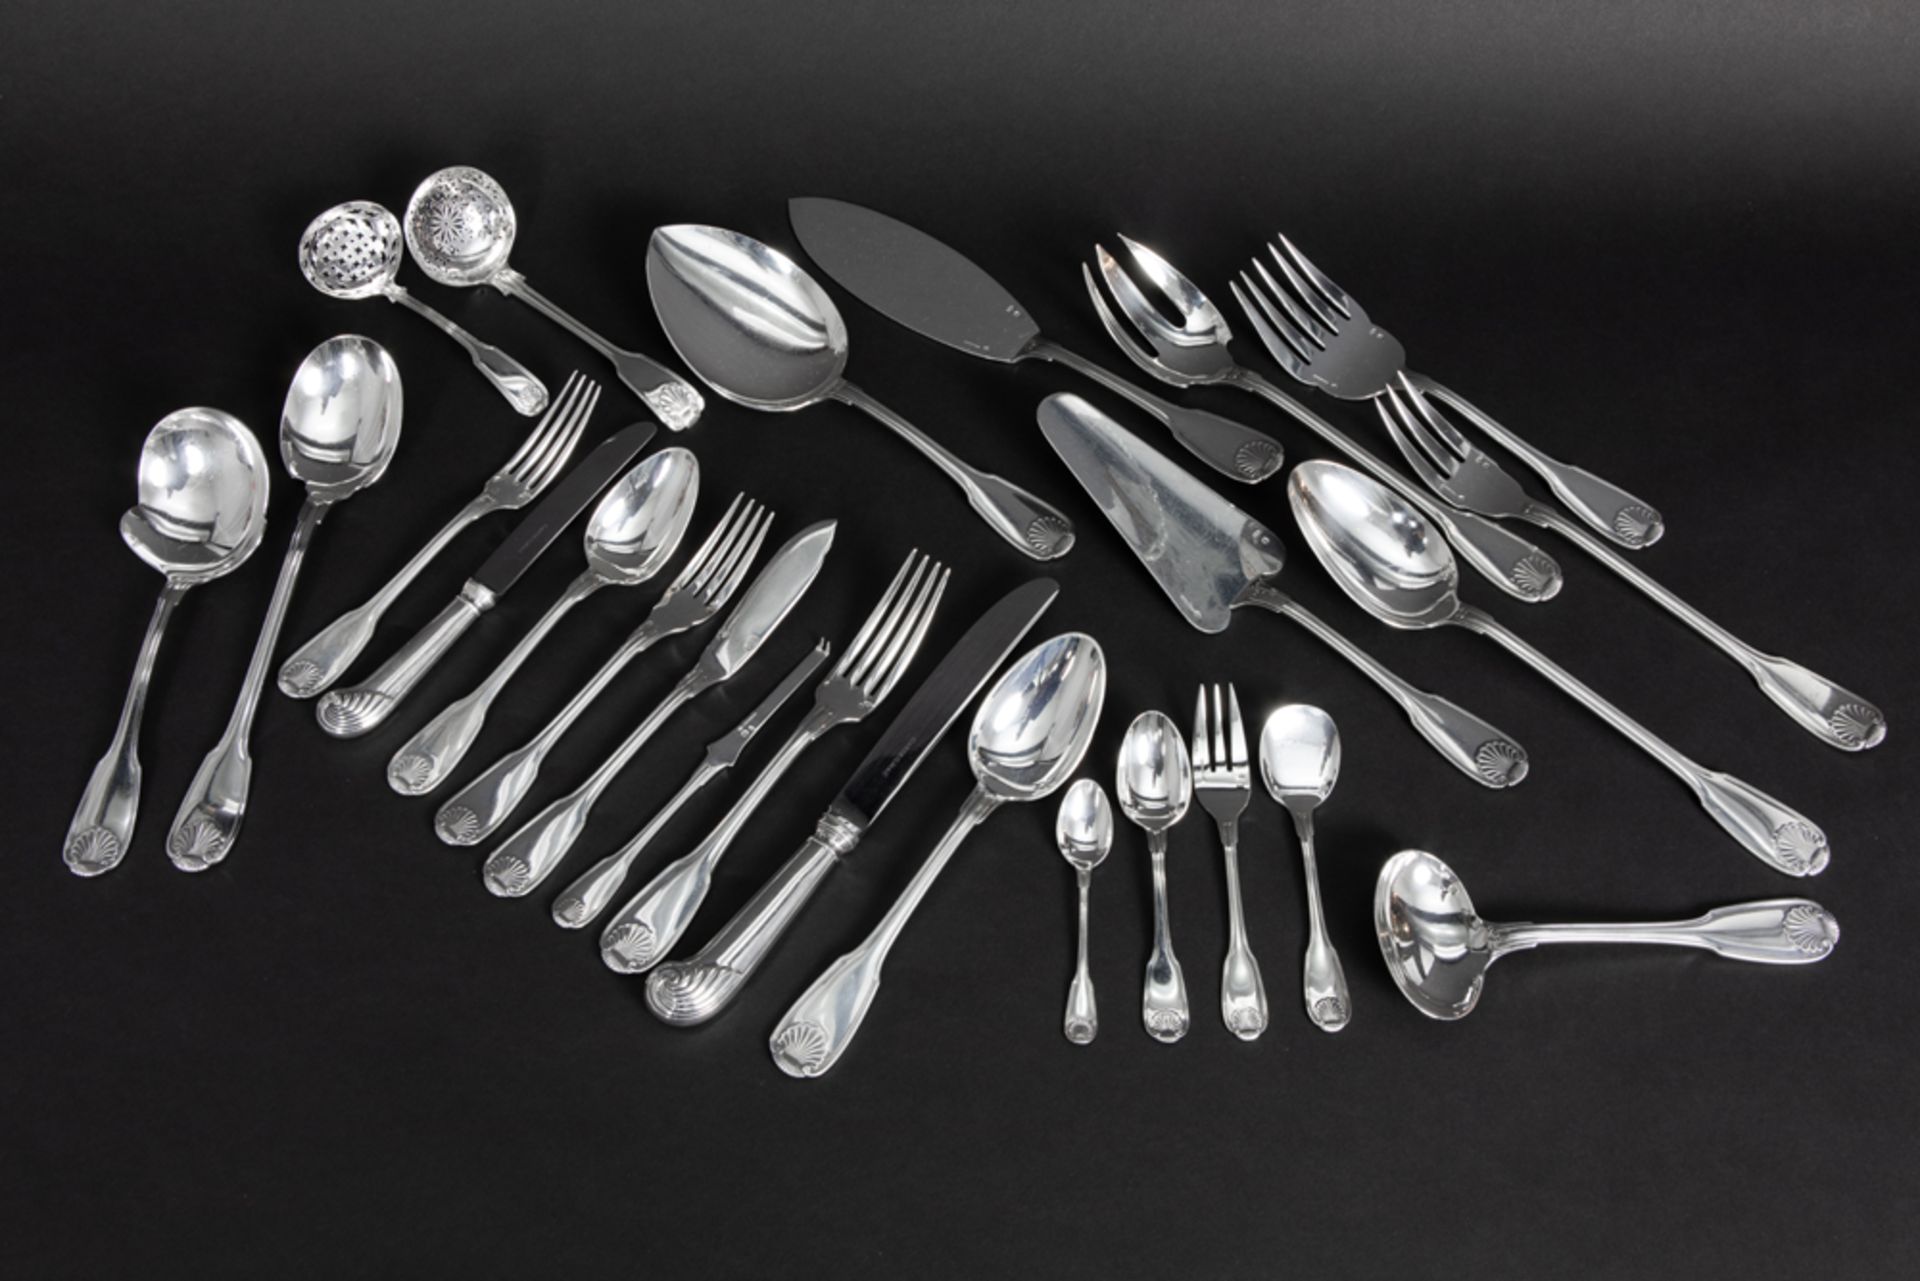 French Cardeilhac signed set of 175 pieces of cutlery in marked silver || CARDEILHAC Frans 172 -